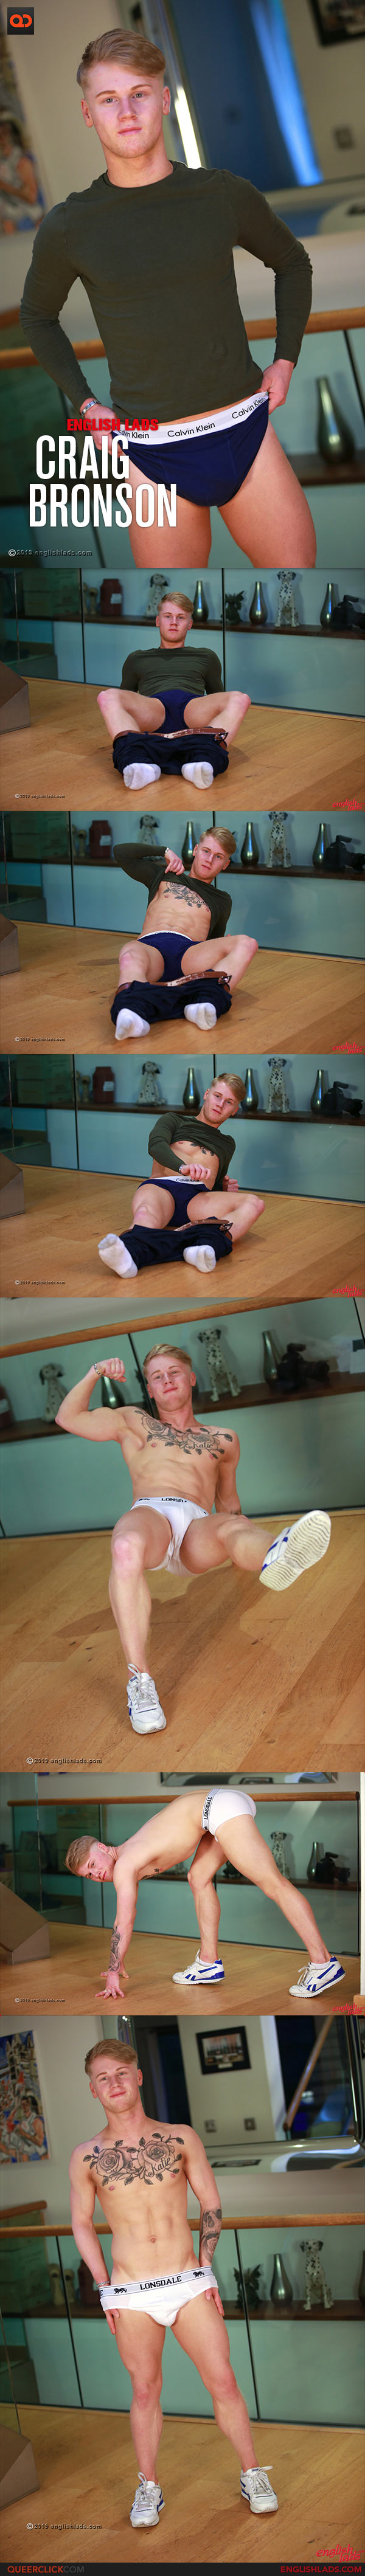 English Lads: Craig Bronson - Blond Young Personal Trainer Shows us his Big Uncut Cock!